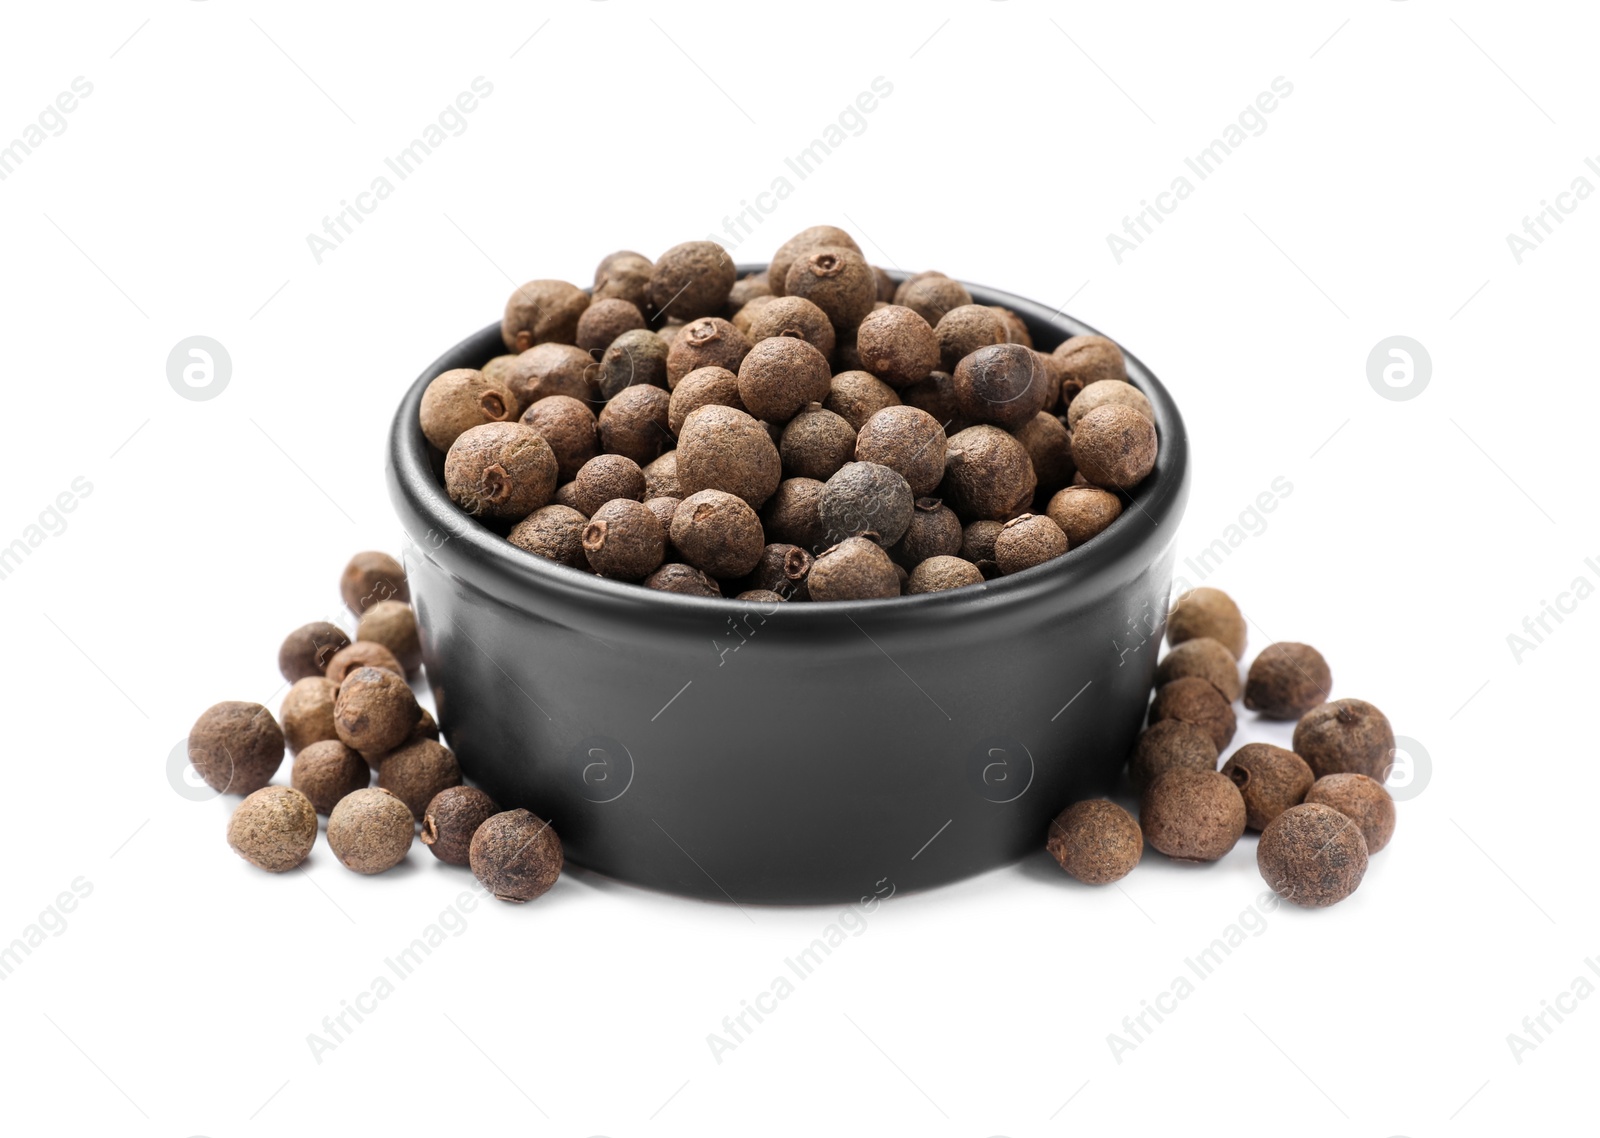 Photo of Dry allspice berries (Jamaica pepper) in bowl isolated on white